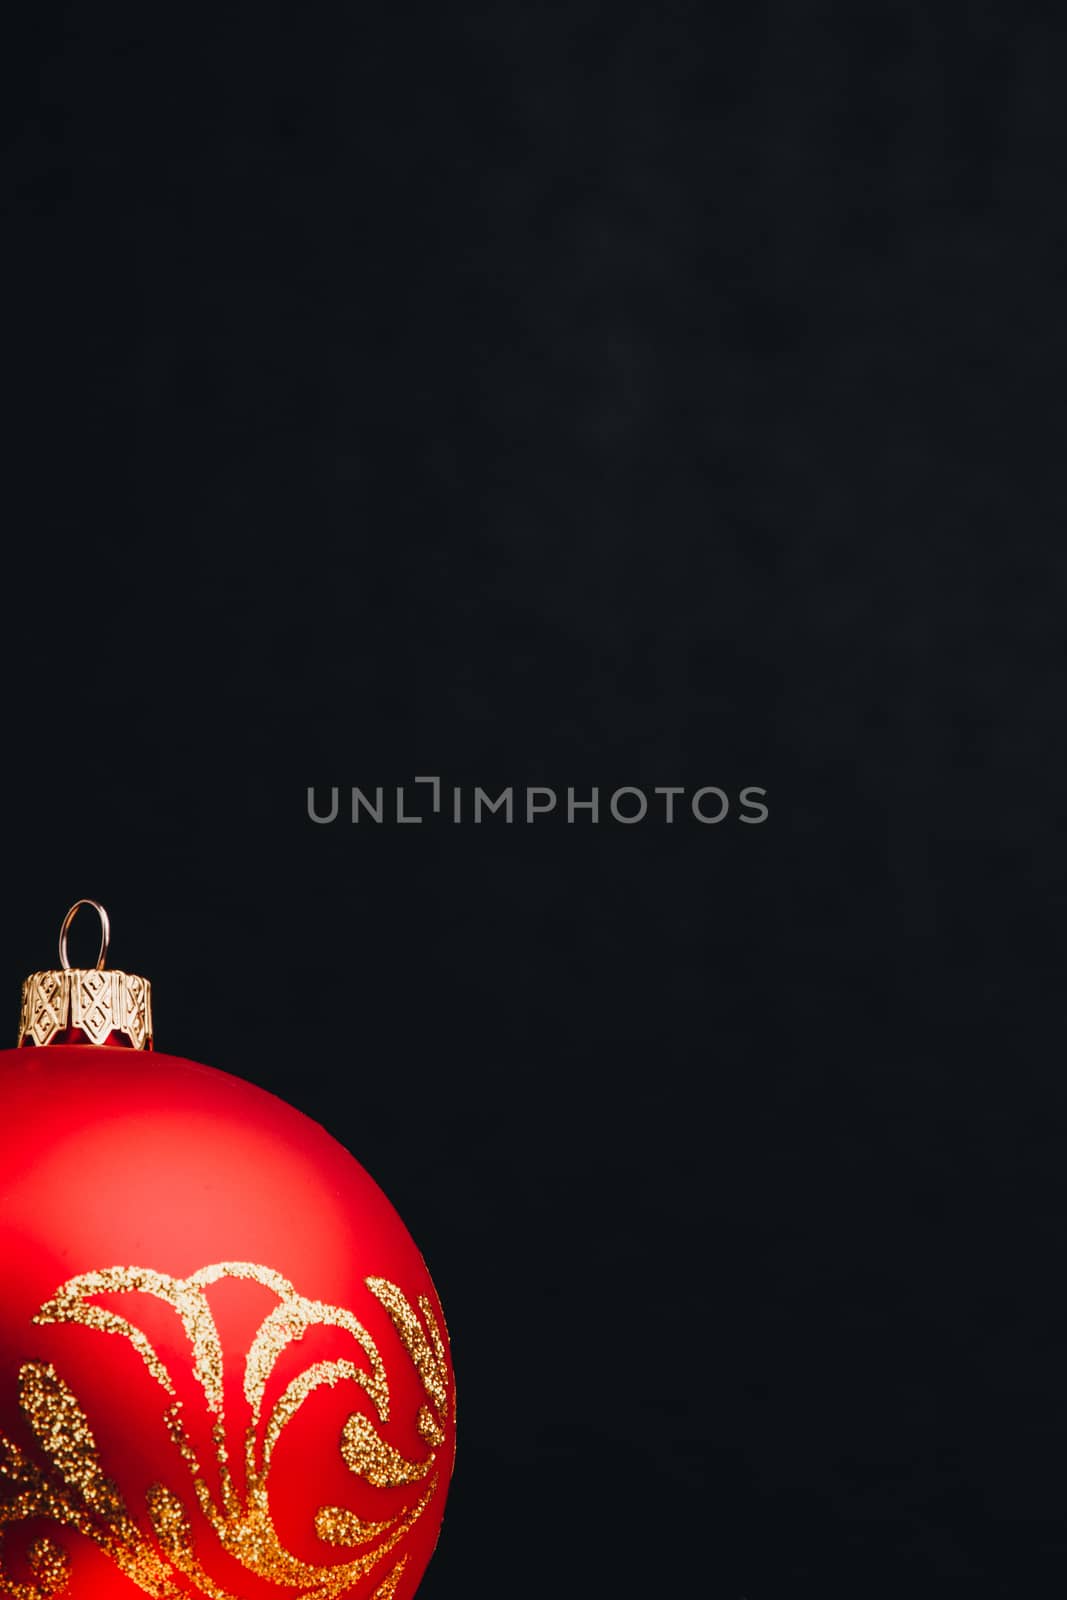 Colored christmas decorations on black wooden table. Xmas balls on wooden background. Top view, copy space. new year by yulaphotographer